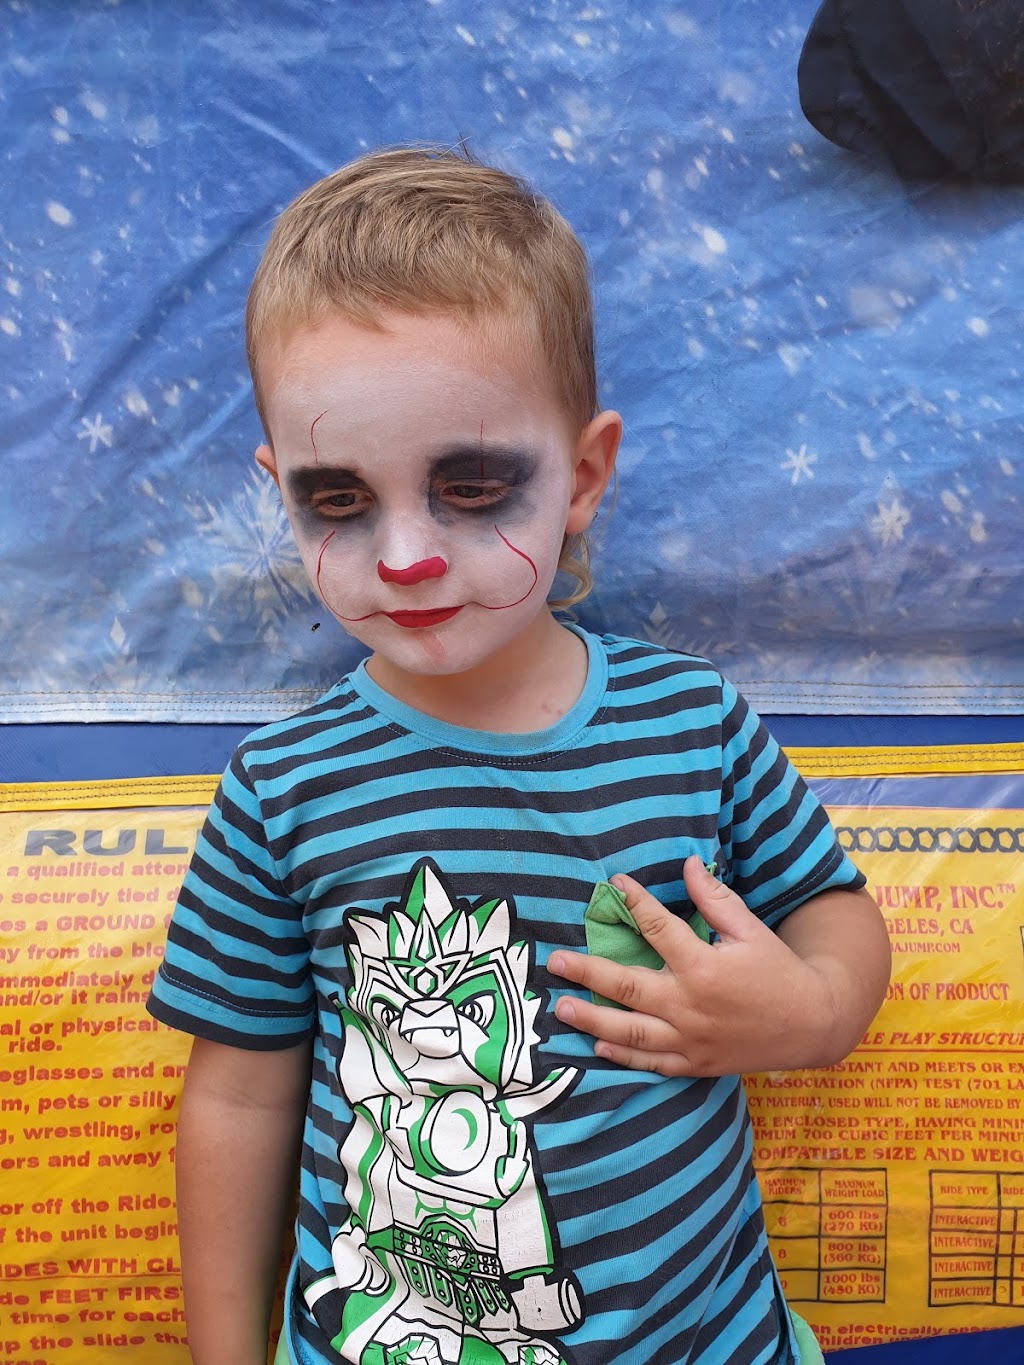 Western Sydney Jumping Castles and Face Painting | food | Oxford St, Cambridge Park NSW 2747, Australia | 0474984062 OR +61 474 984 062